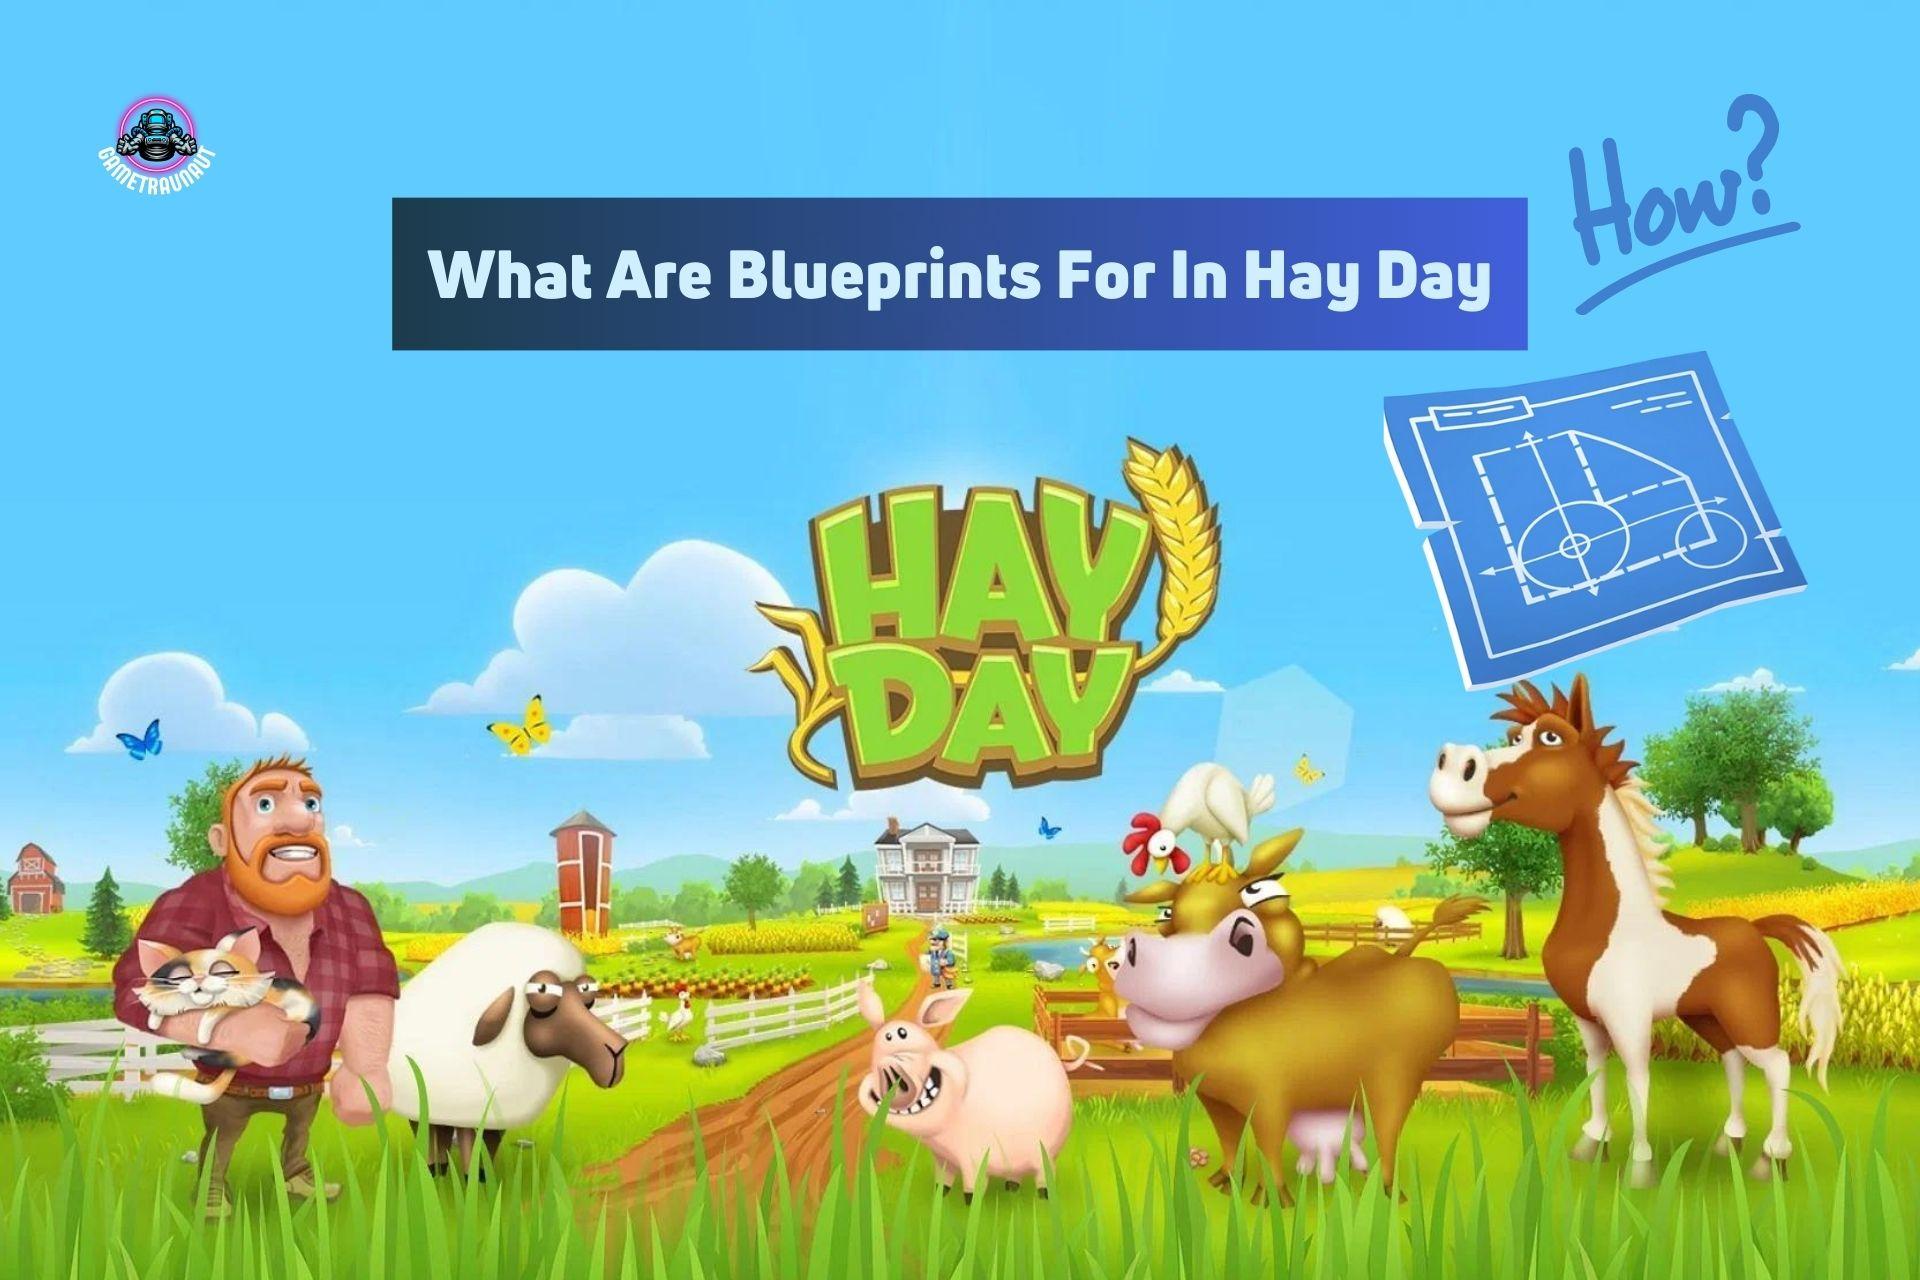 what are blueprints for in hay day